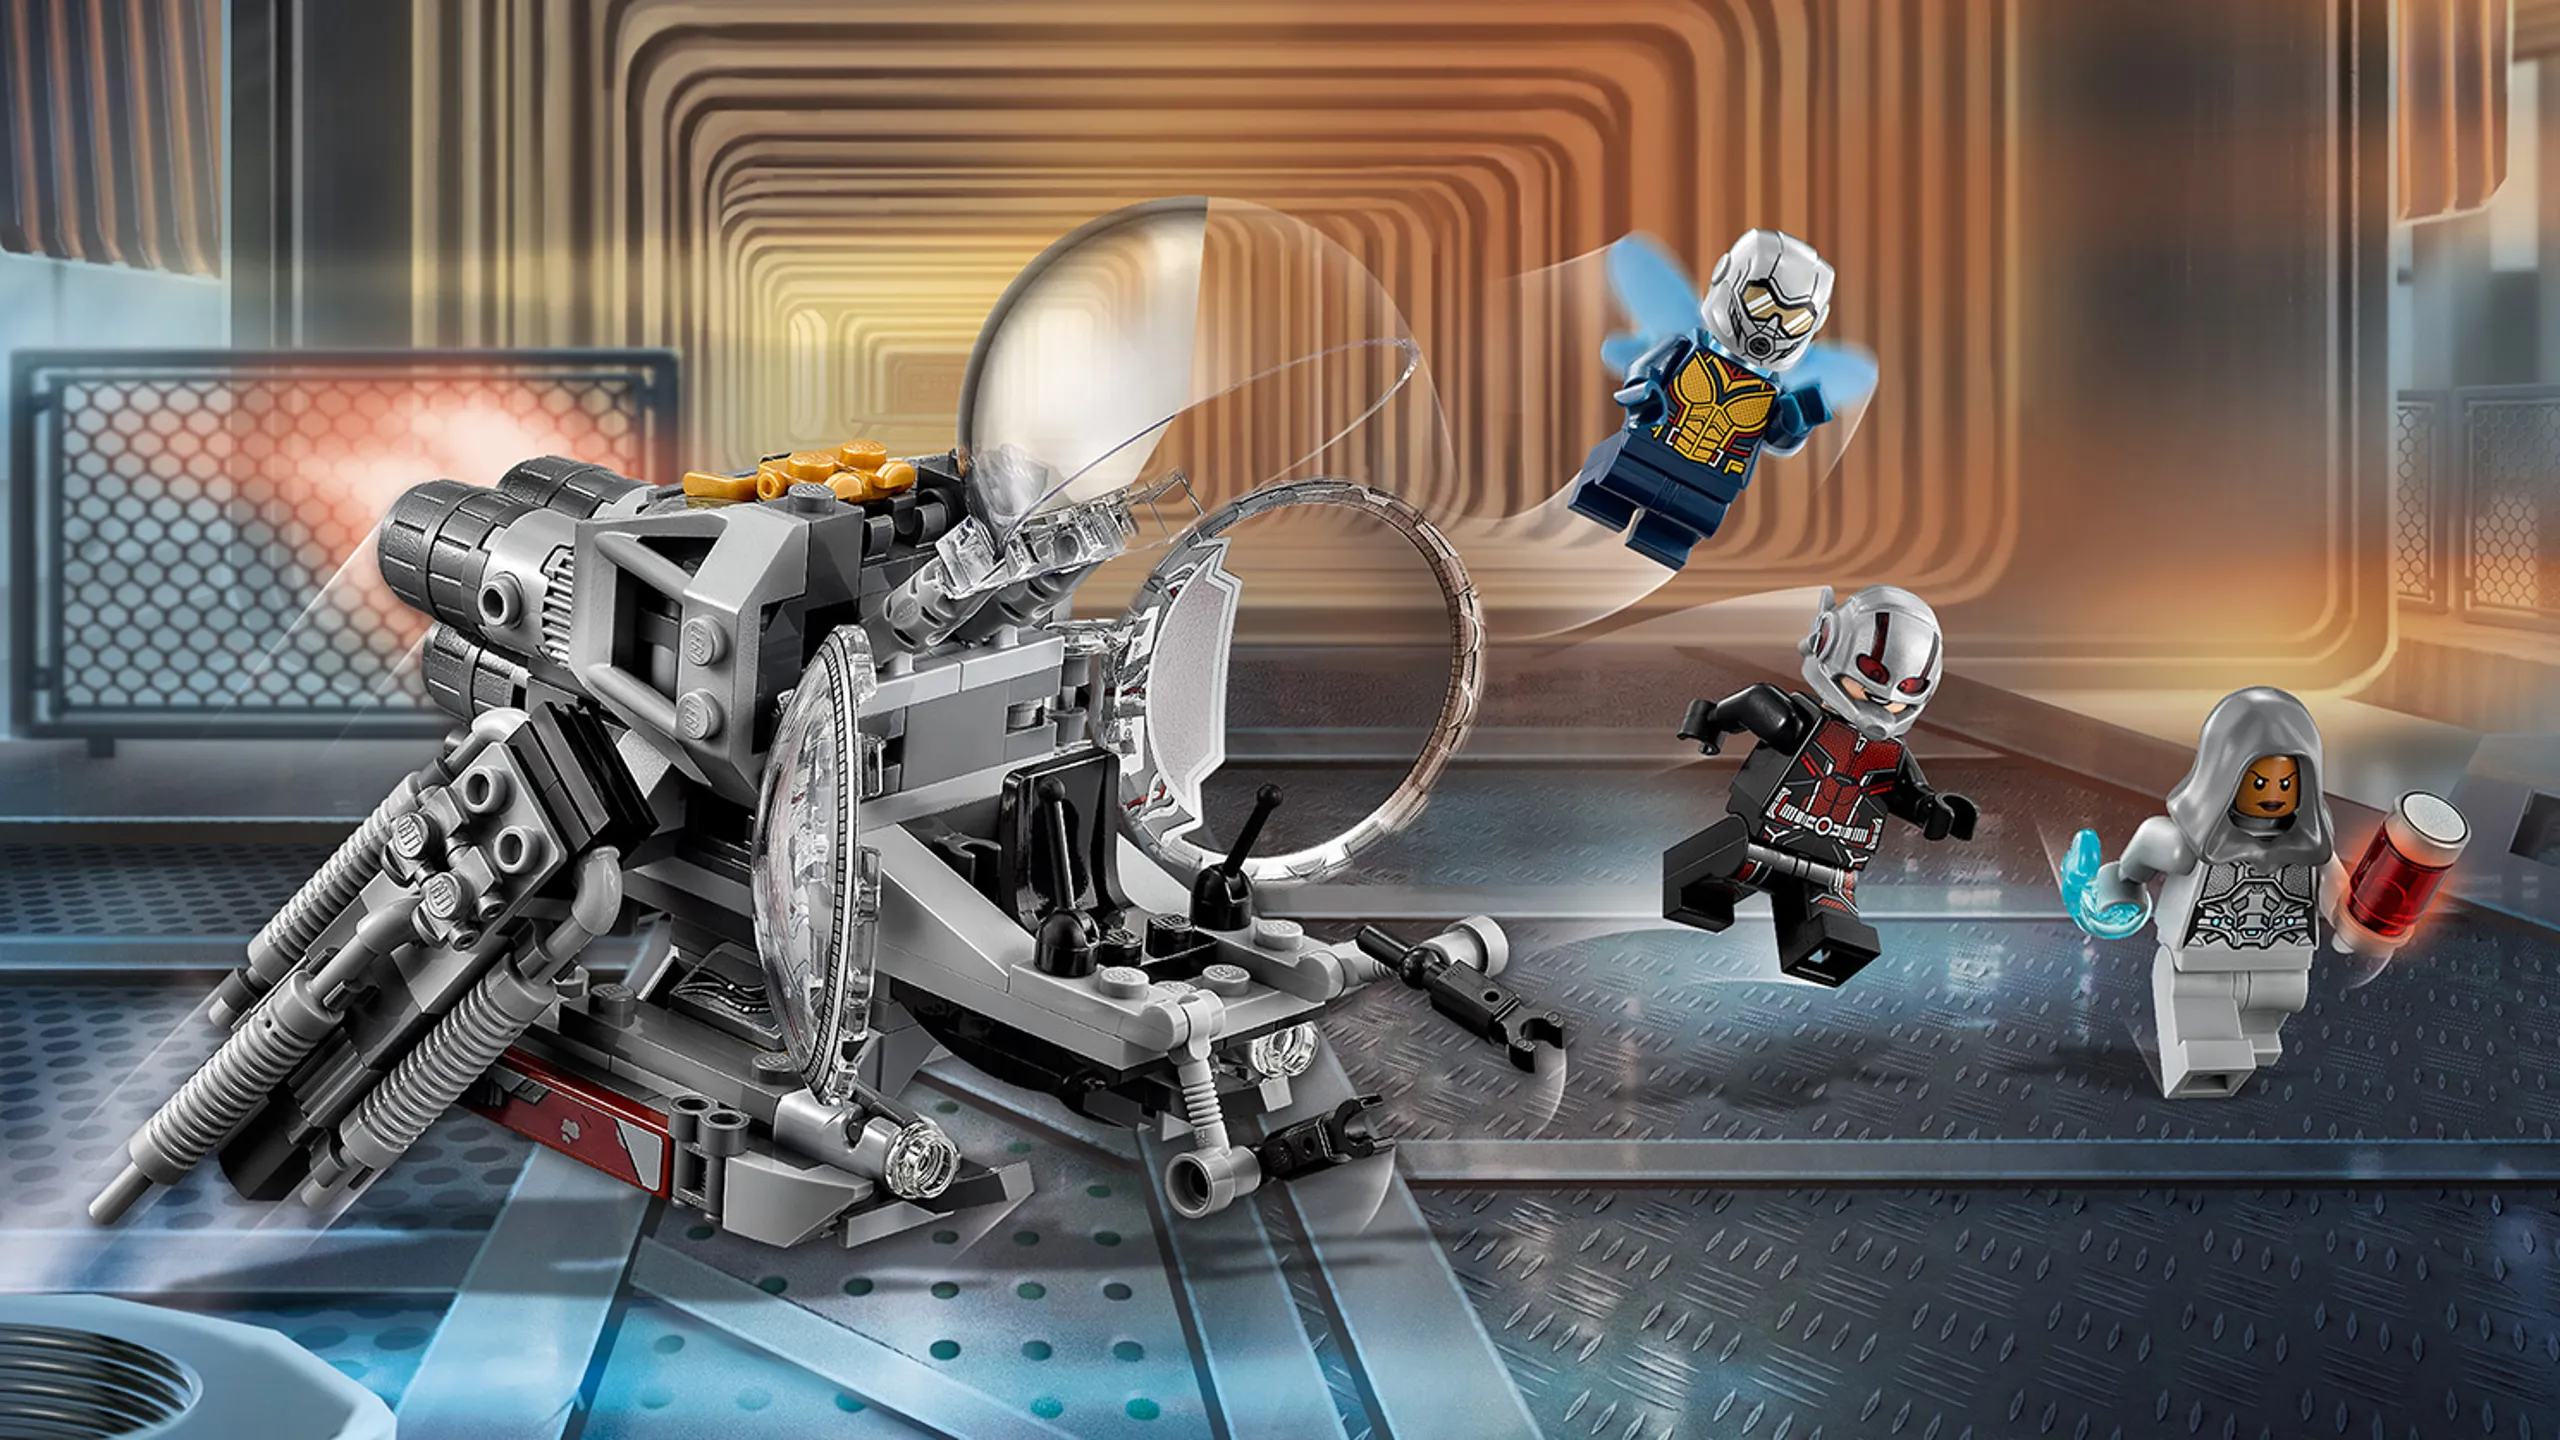 LEGO Super Heroes - 76109 Quantum Realm Explorers - Pilot the Quantum Vehicle with Ant-Man and team up with The Wasp to take on Ghost!